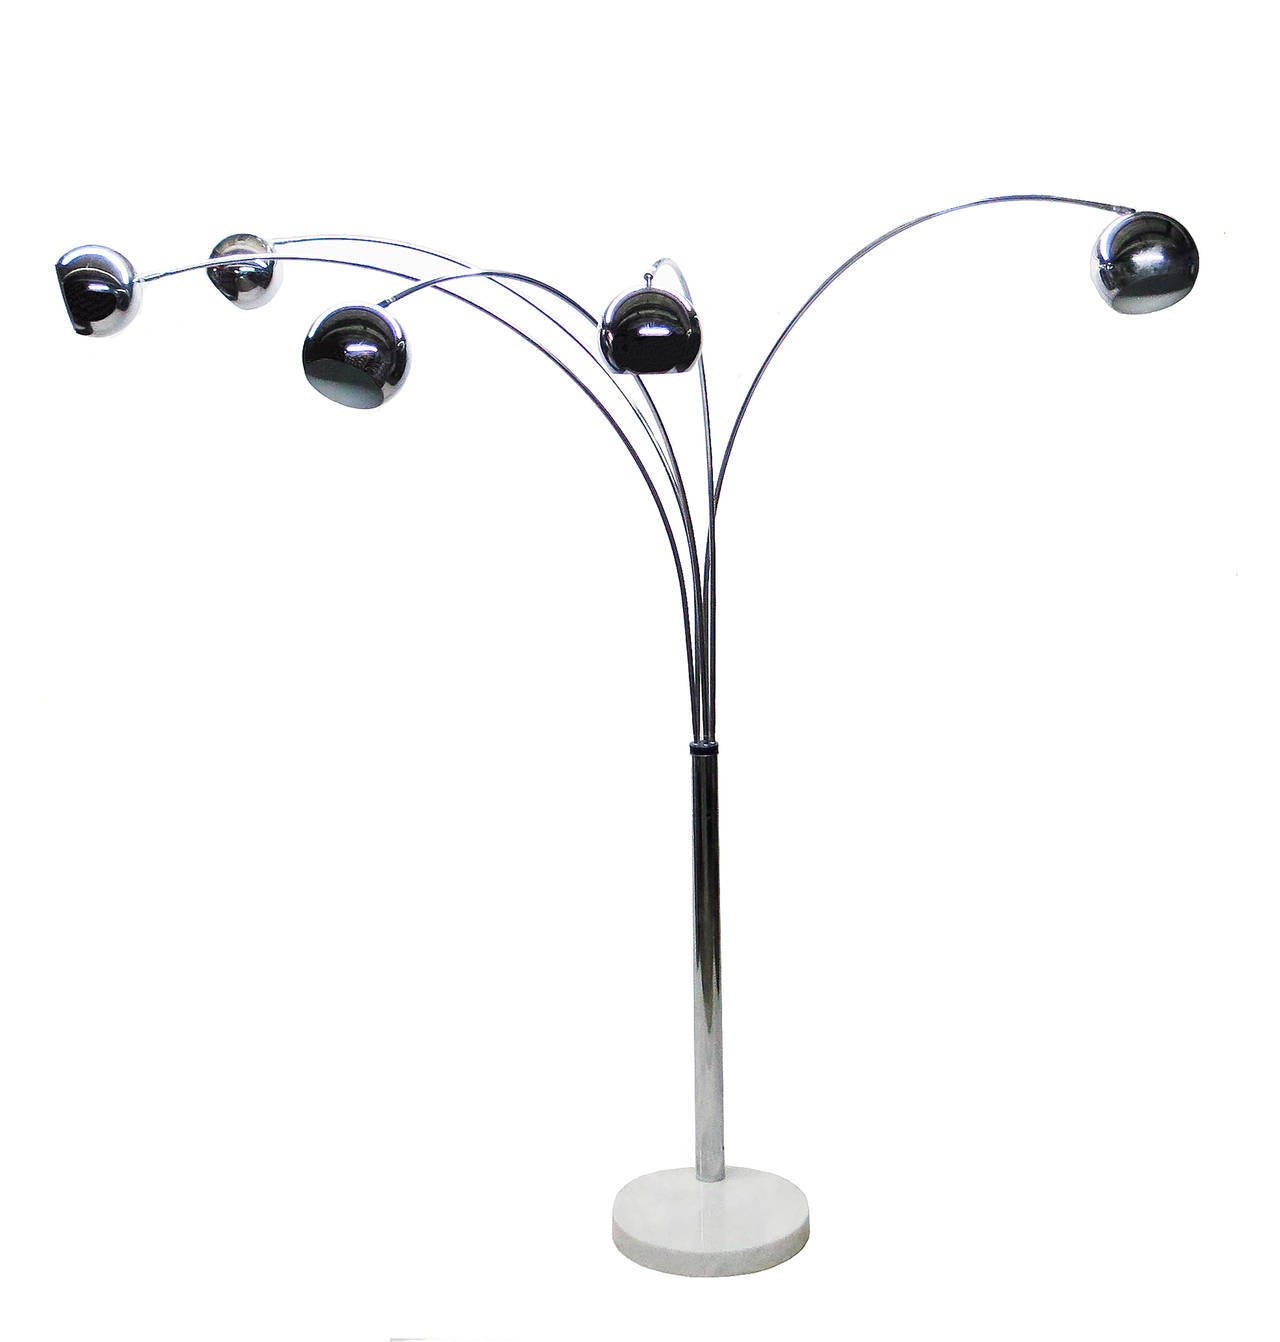 Floor lamp in chrome-plated steel with five, articulating, ball shades each attached to an arched tubular arm that swings 360 degrees allowing all five arms to be placed in various positions. The lamp has a heavy round marble base at the bottom